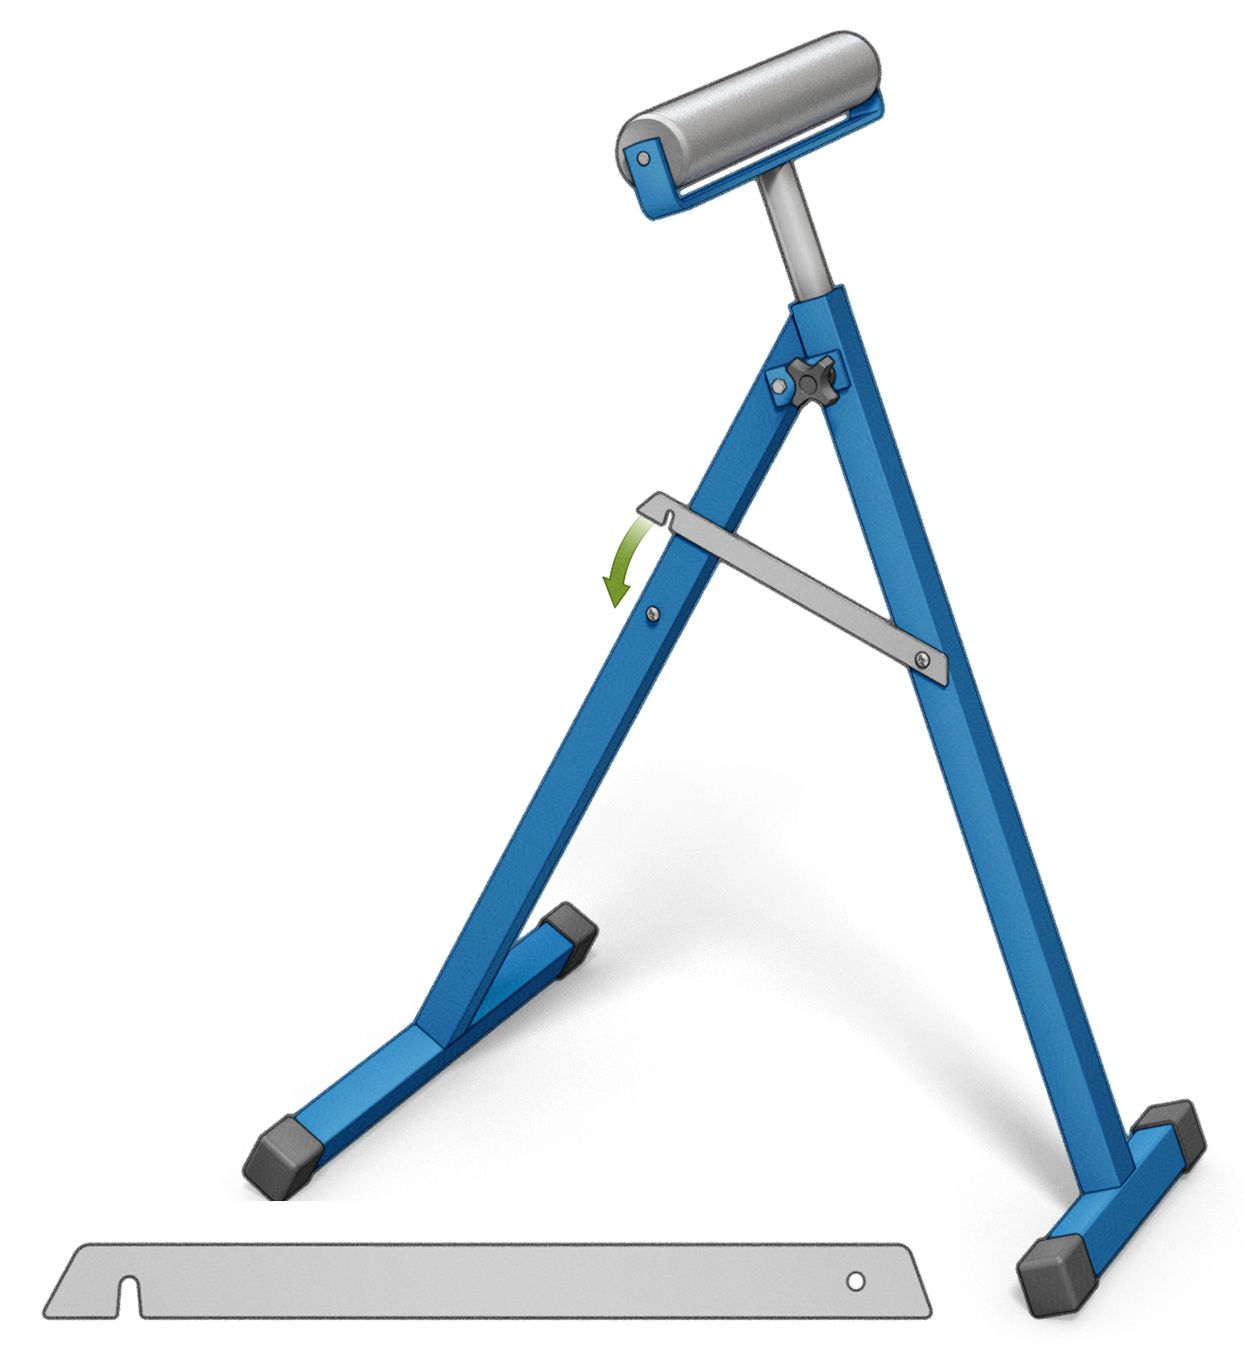 Roller stand with latch for support